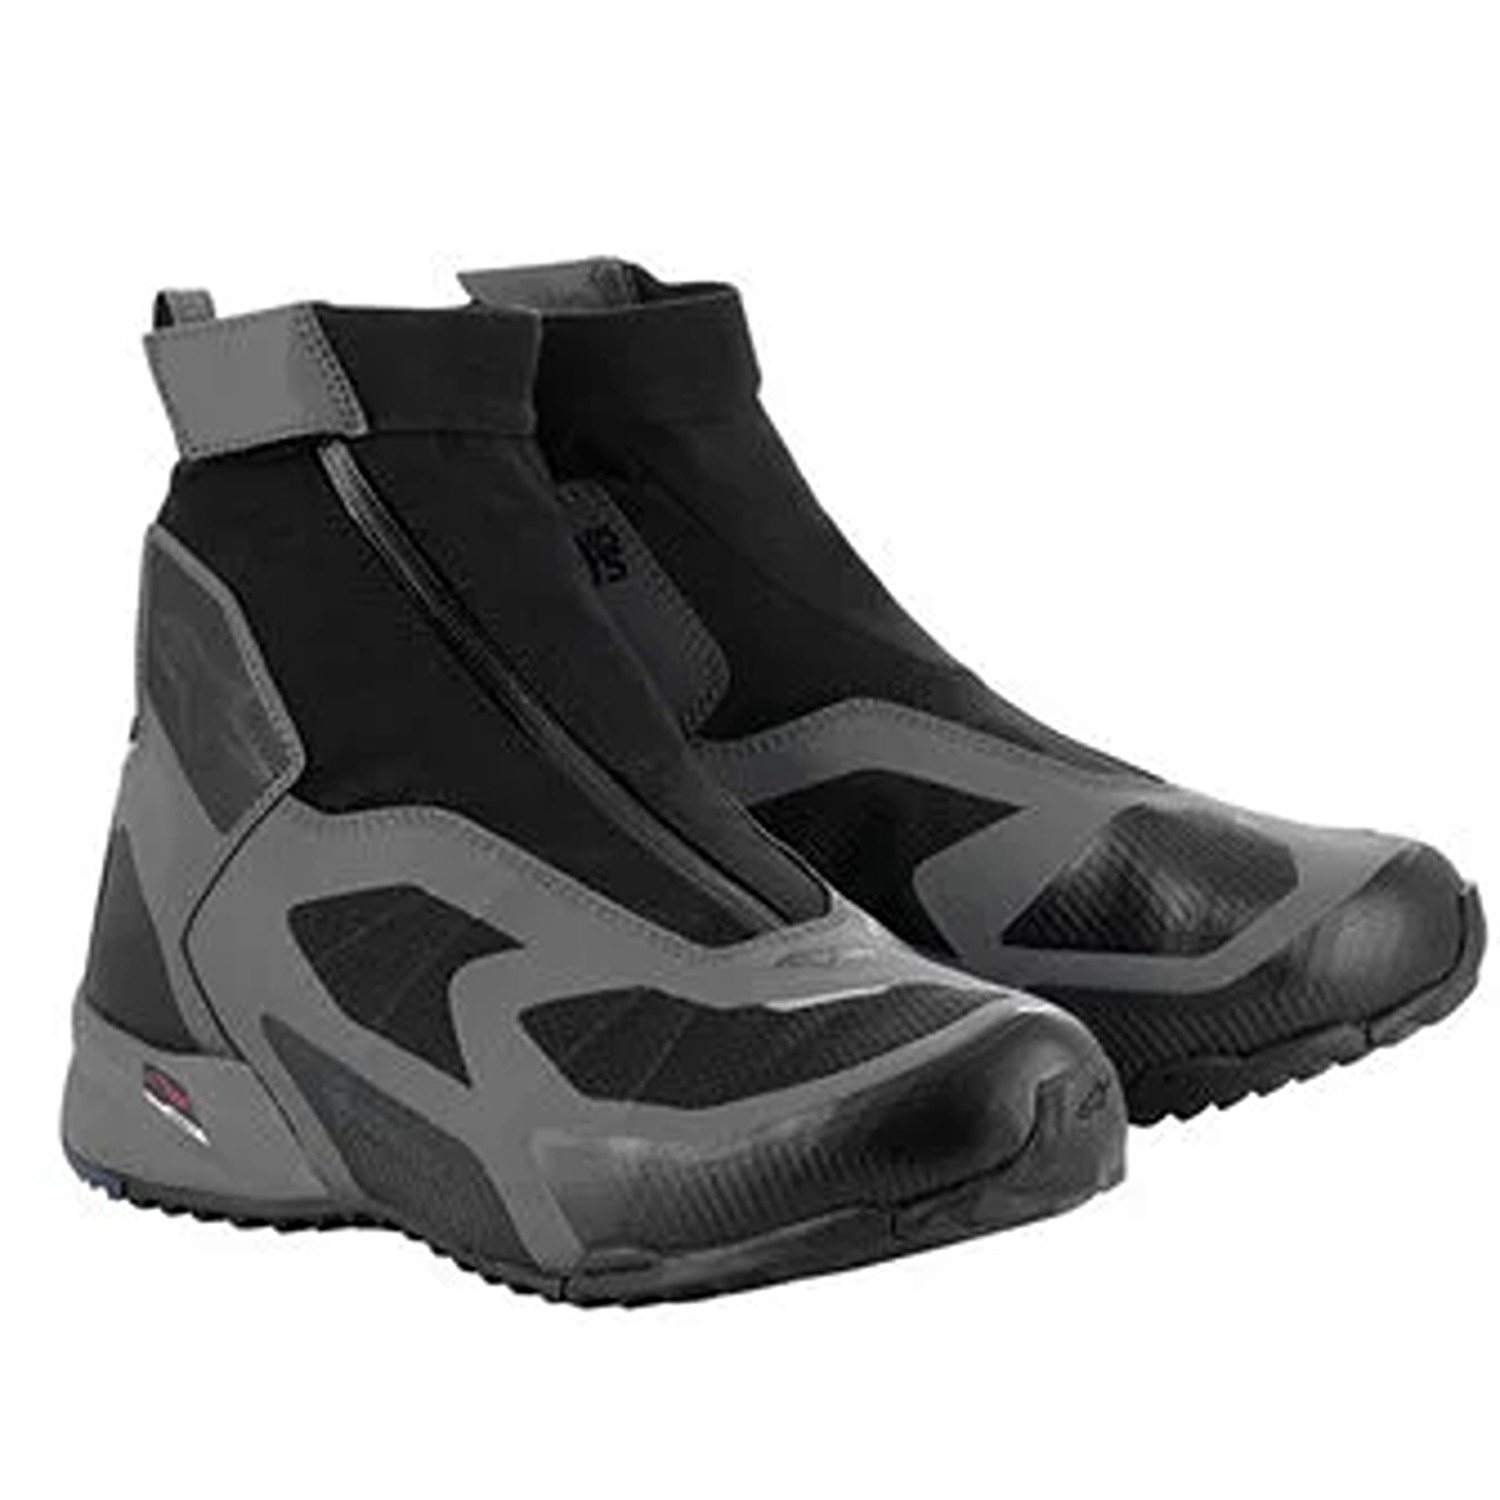 Image of Alpinestars CR-8 Gore-Tex Shoes Black Mid Gray Bright Red Size US 11 EN